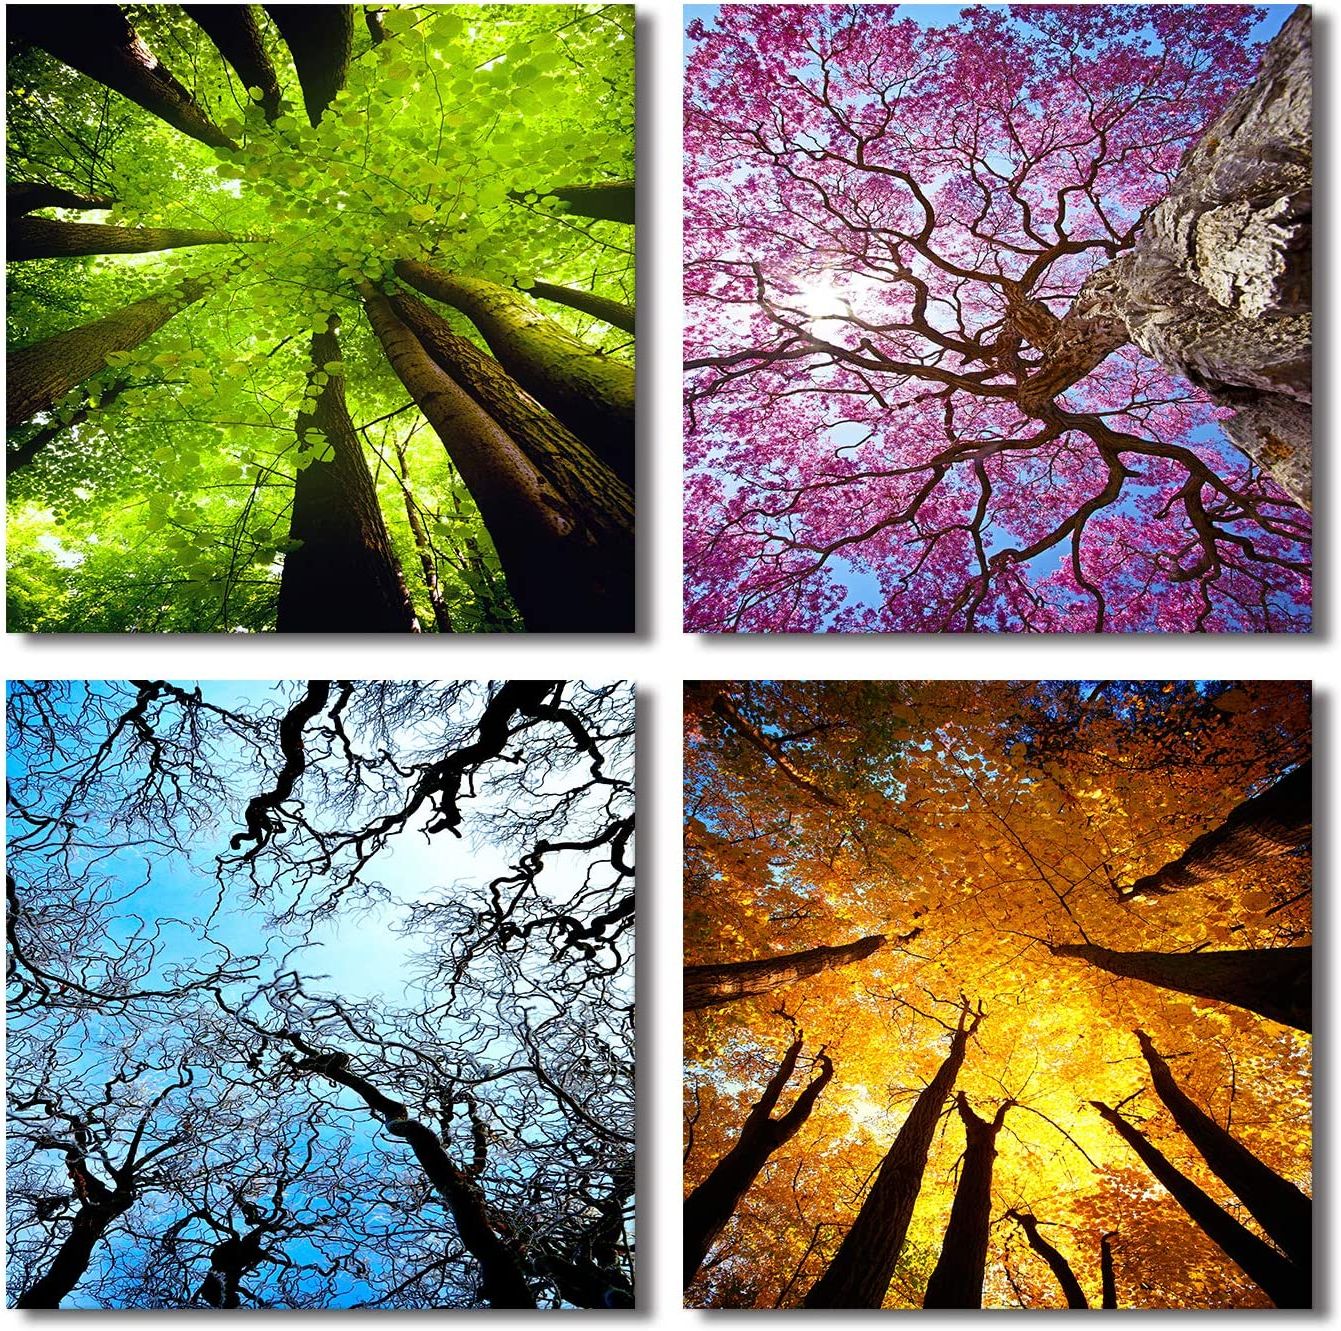 Spring Summer Wall Art Inside Popular 4 Panels Canvas Wall Art Spring Summer Autumn Winter Four Seasons Landscape  Color Tree Painting Picture Prints Modern Giclee Artwork Stretched And  Framed For Homel Decoration (30x30cmx4pcs) : Amazon (View 8 of 15)